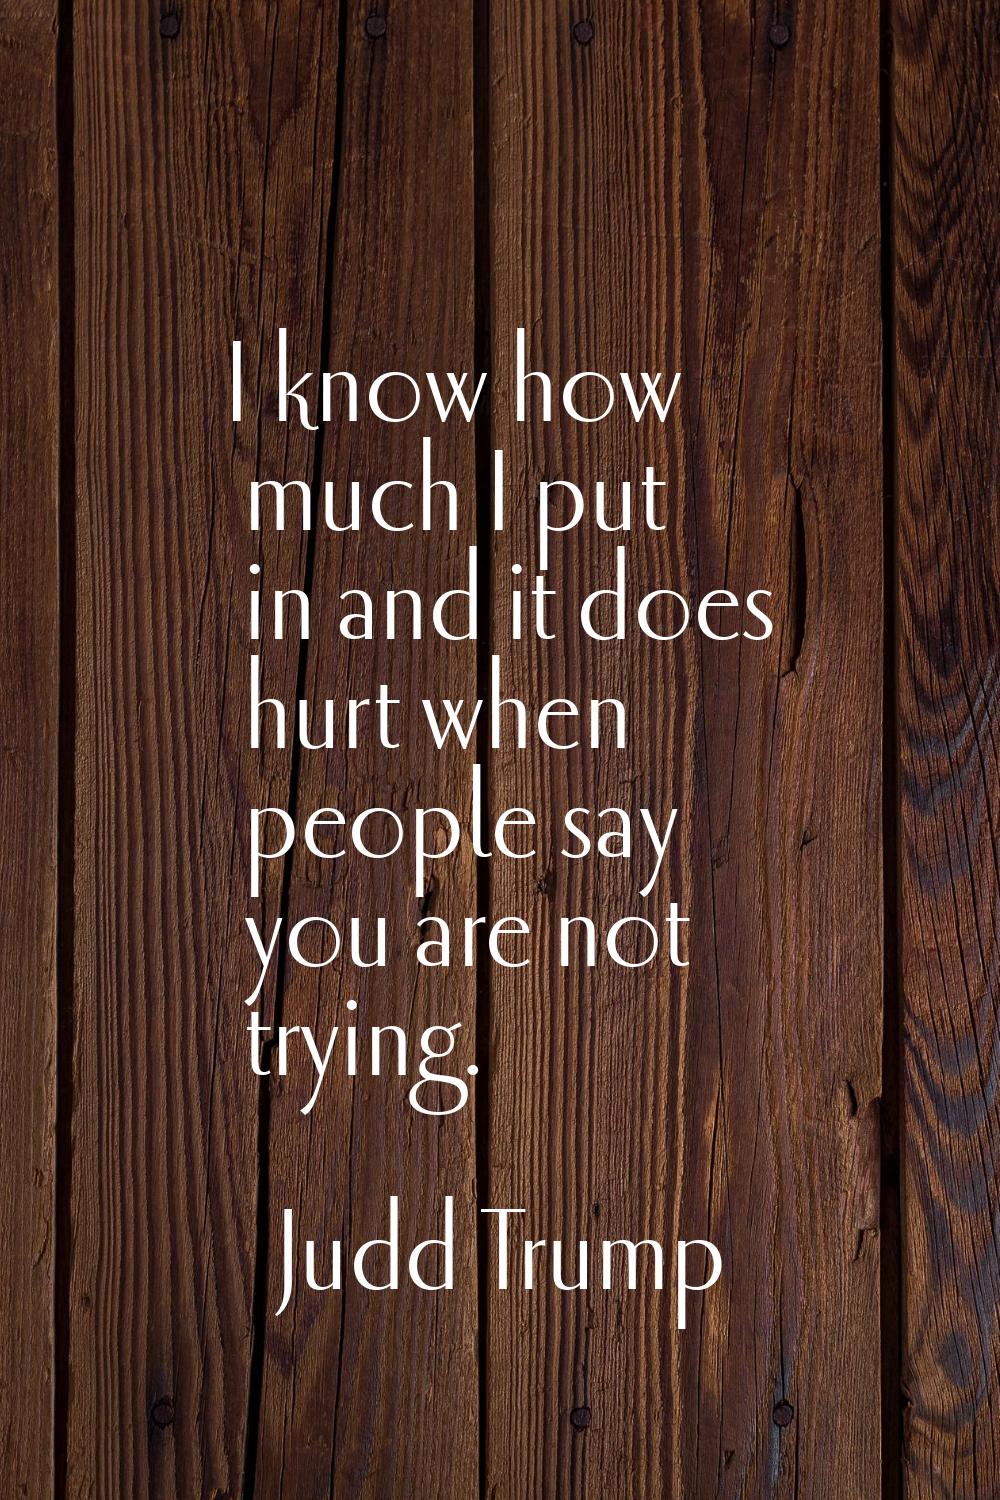 I know how much I put in and it does hurt when people say you are not trying.